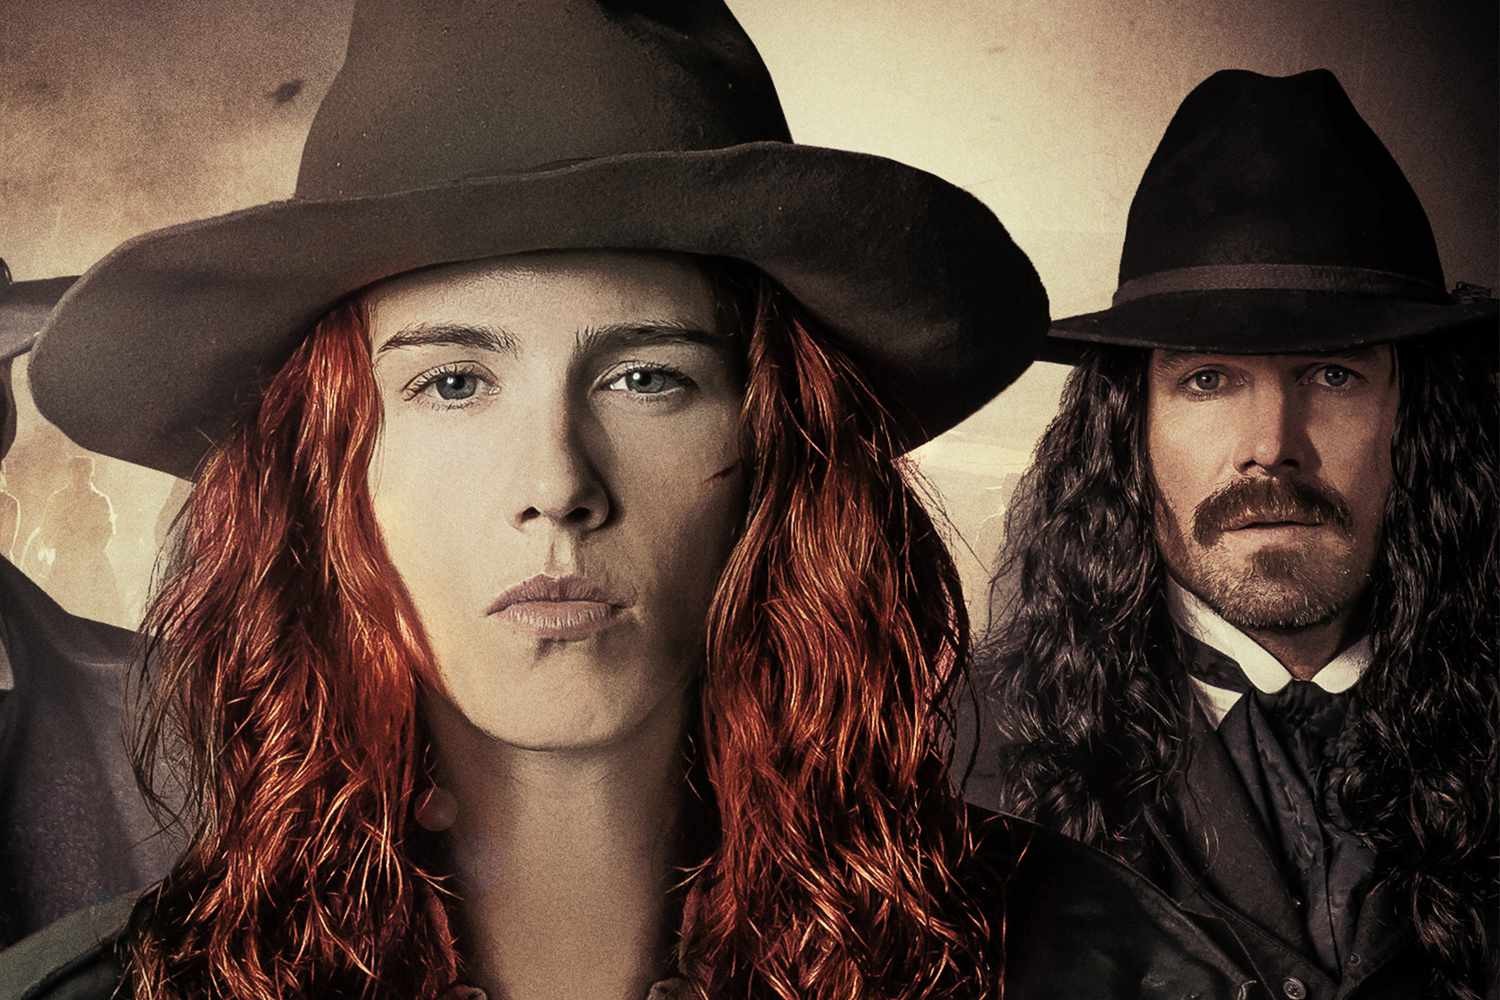 Emily Bett Rickards and Stephen Amell in Calamity Jane